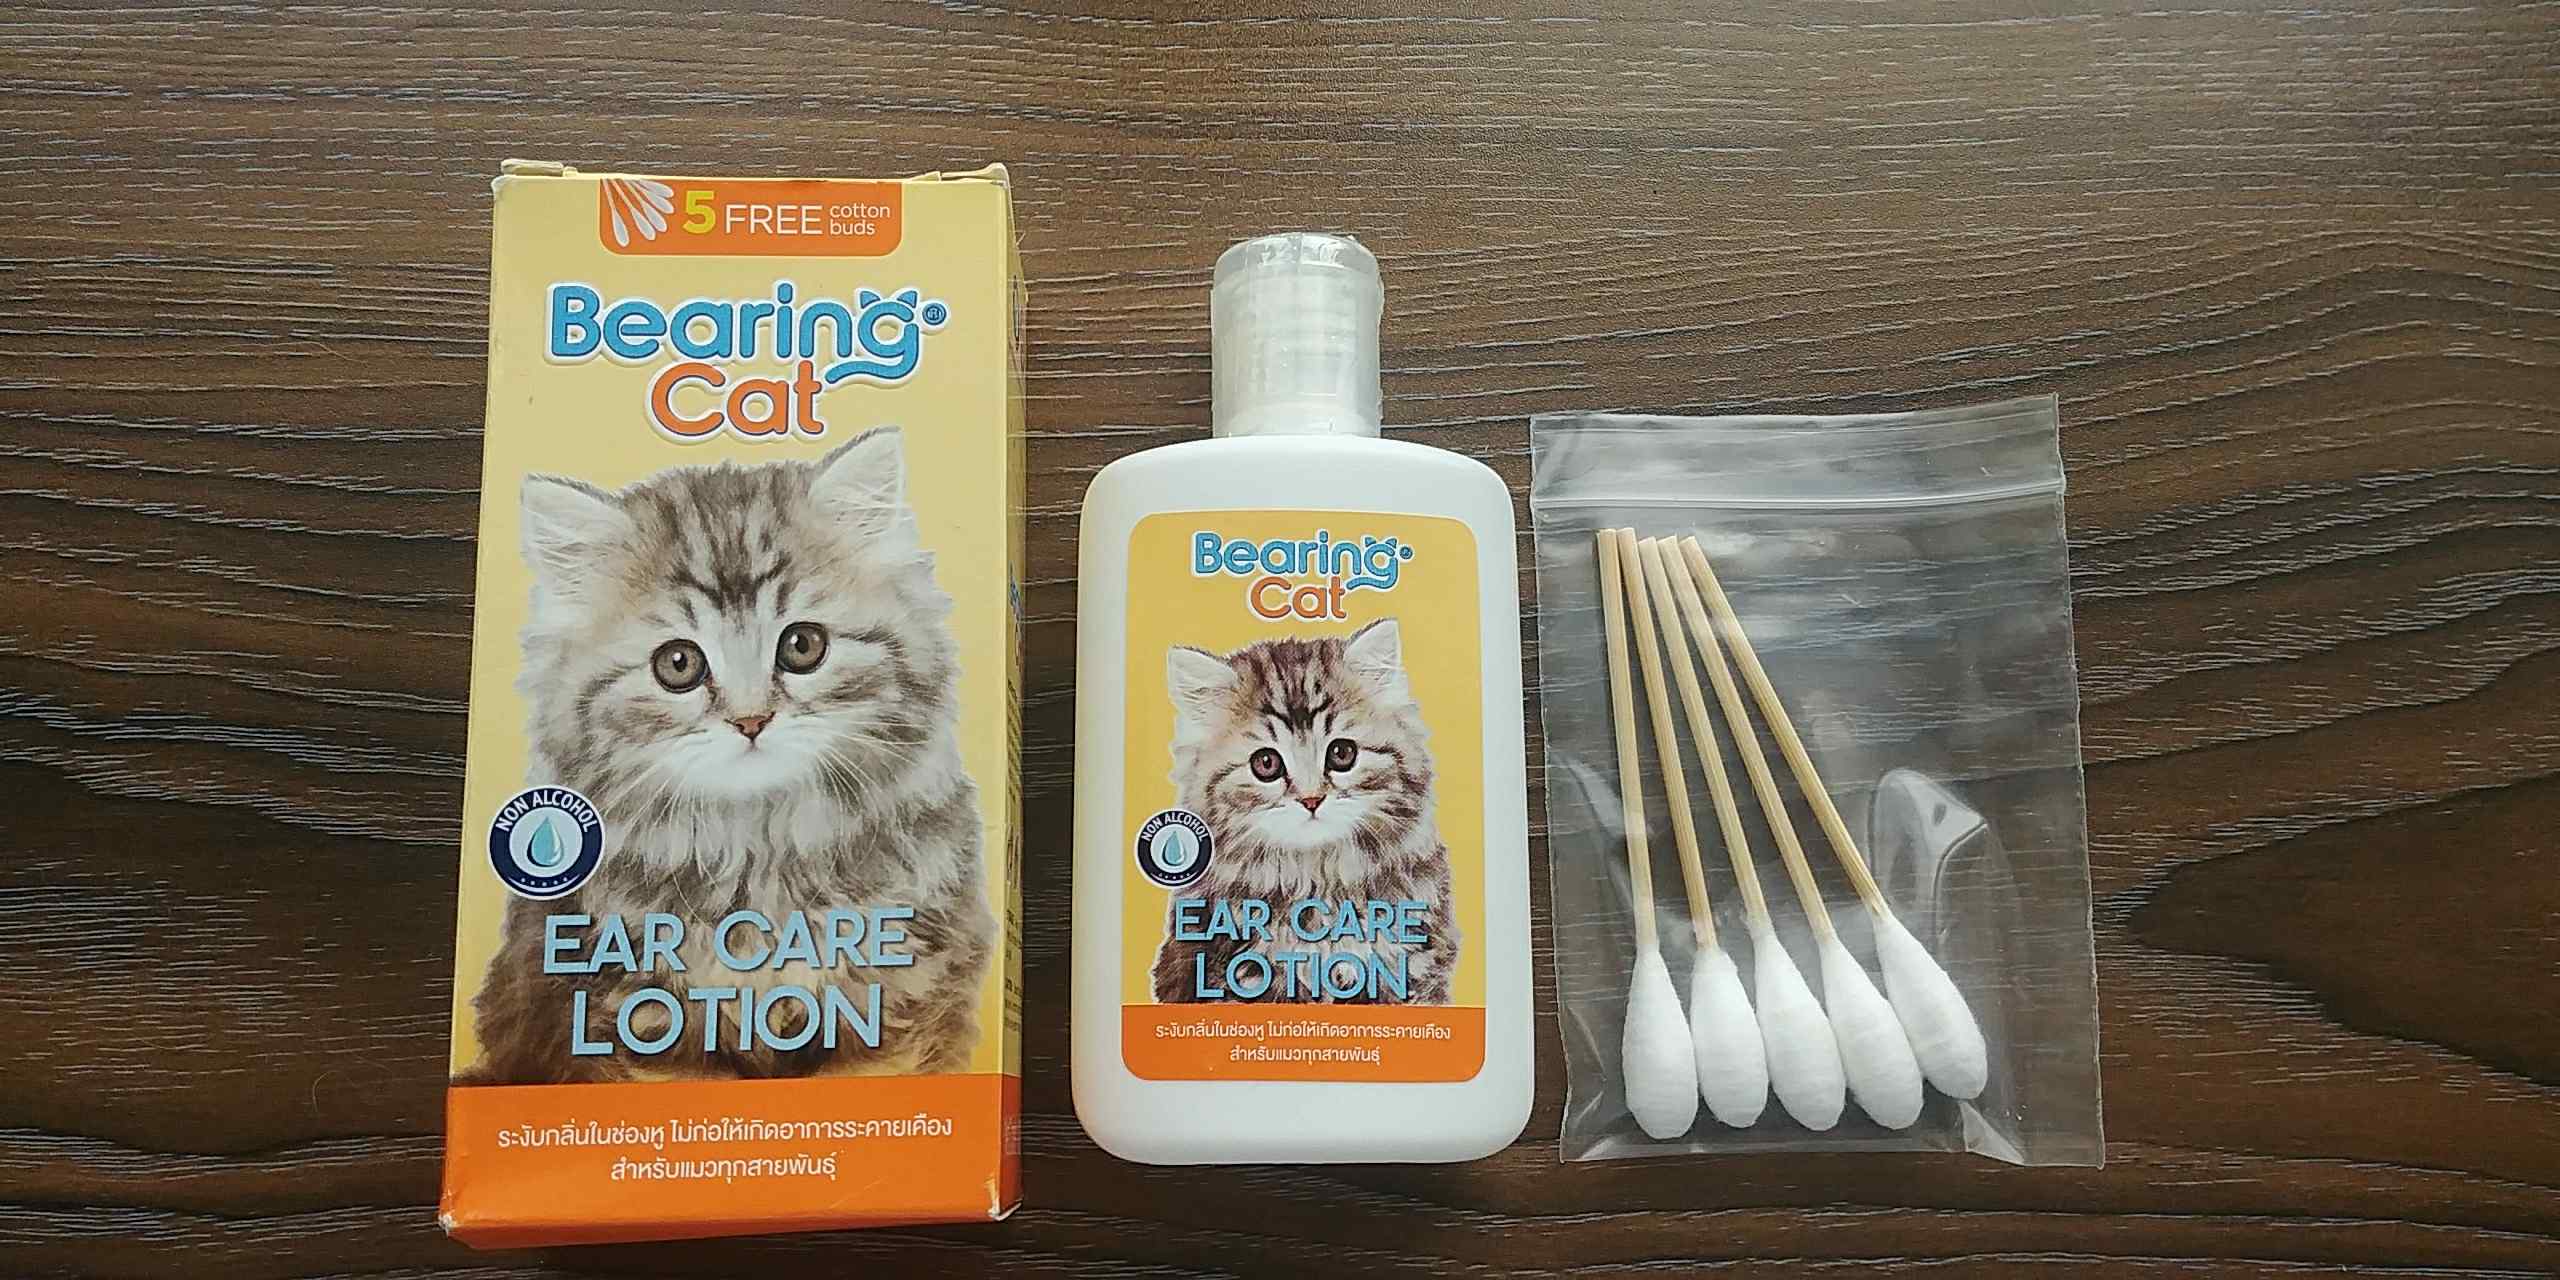 Bearing Cat Ear Care Lotion with free 5 cotton buds | Shopee Philippines